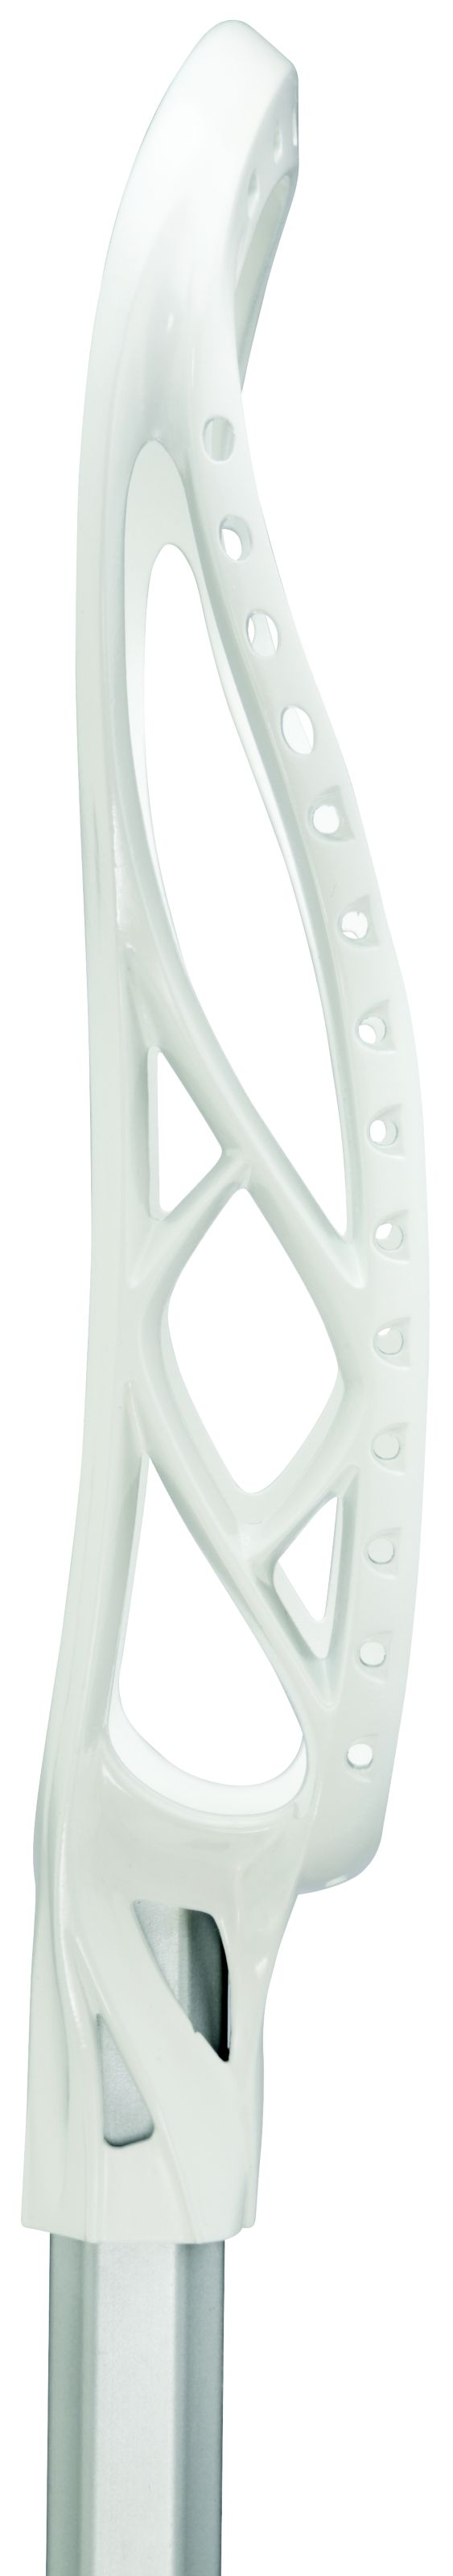 Blade Pro Head Unstrung, White image number 2